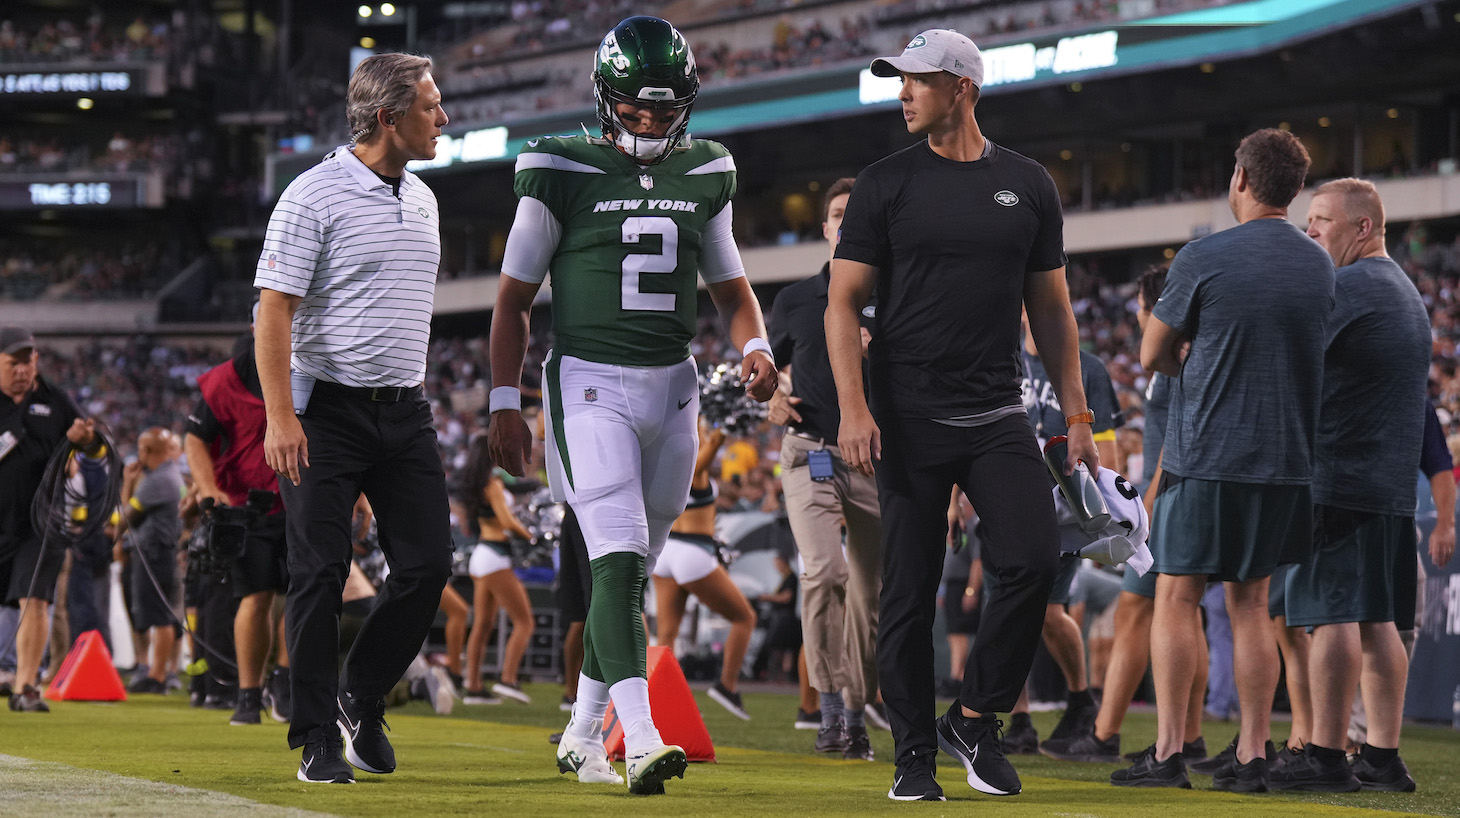 Zach Wilson of the New York Jets walks to the locker room after an injury against the Philadelphia Eagles in the first half of the preseason game against the New York Jets at Lincoln Financial Field on August 12, 2022 in Philadelphia, Pennsylvania.